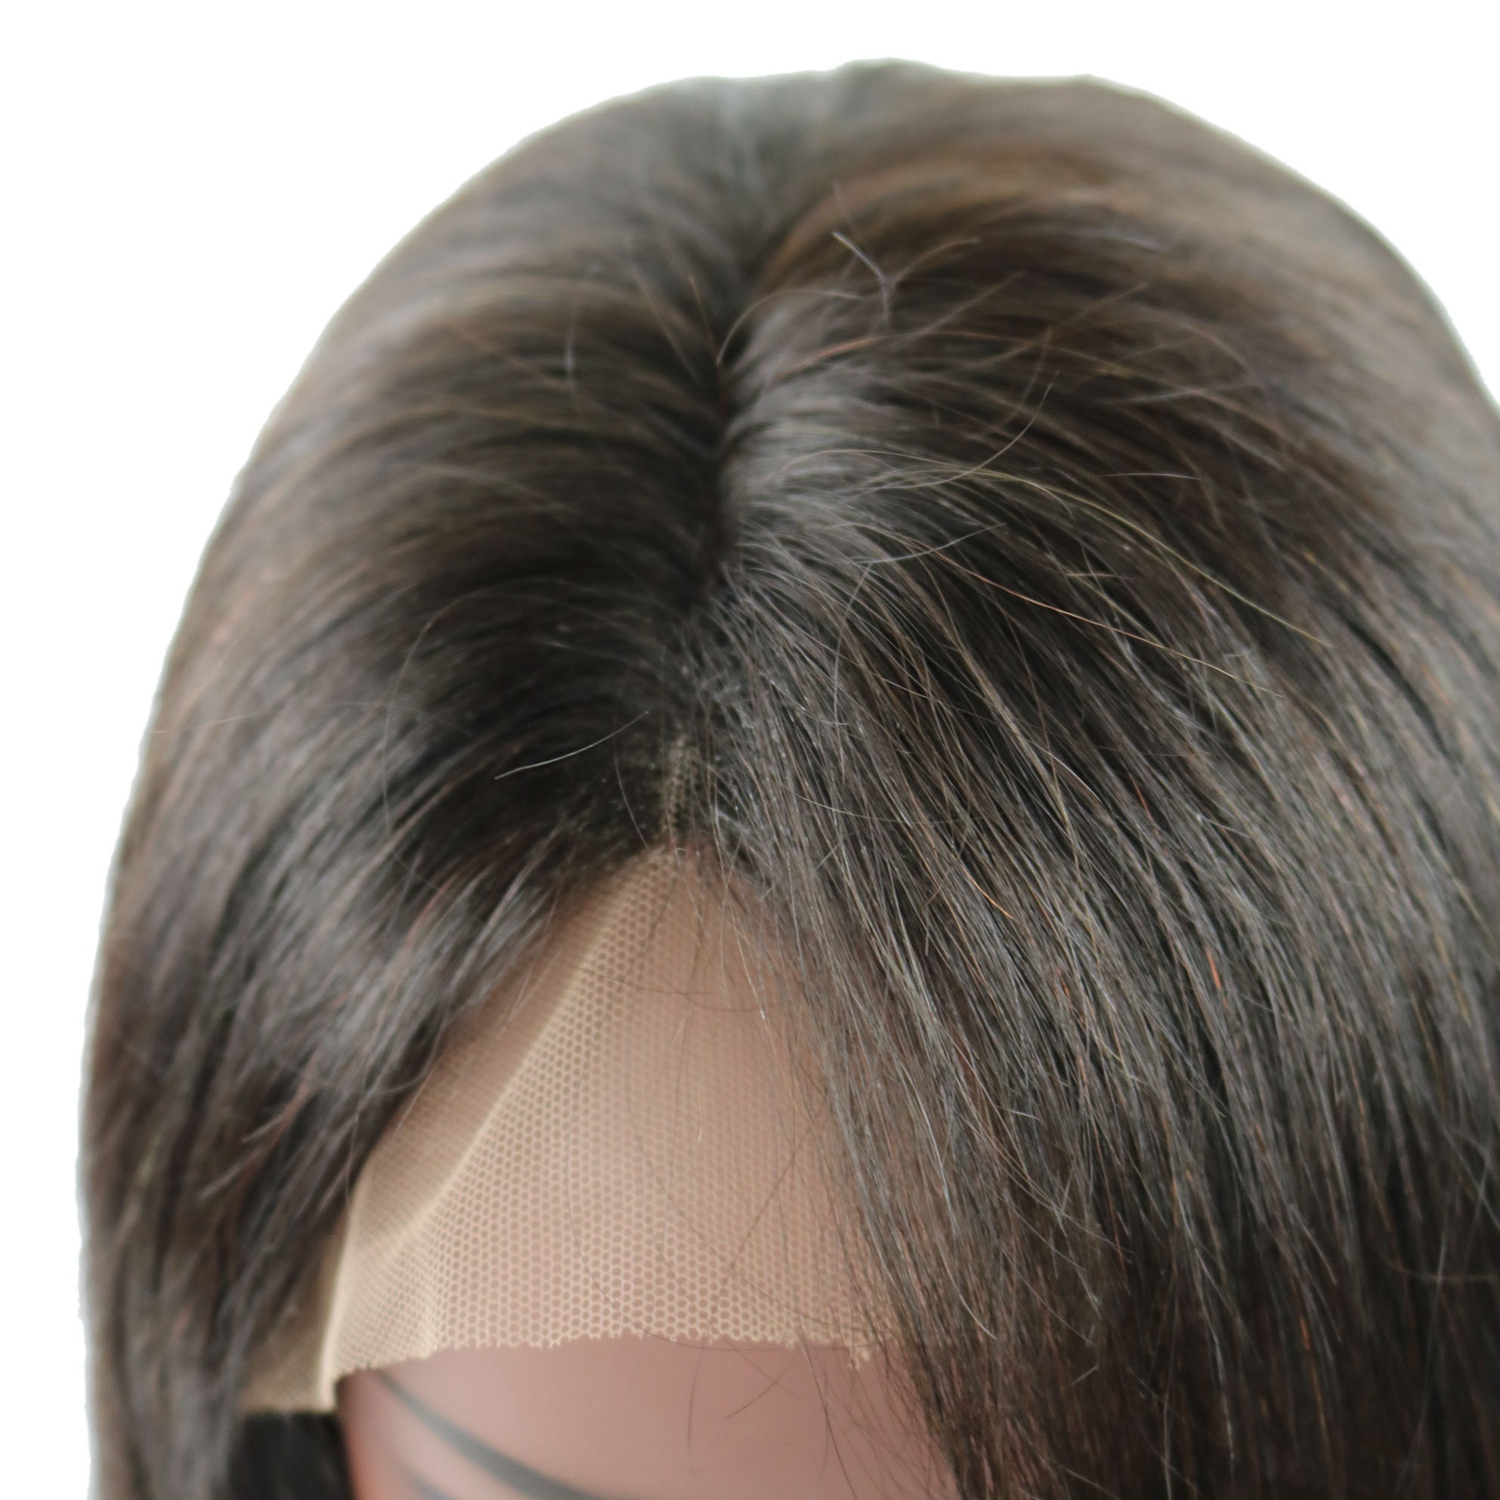 Medium Straight Lace Front Wigs Human Hair 12 Inches